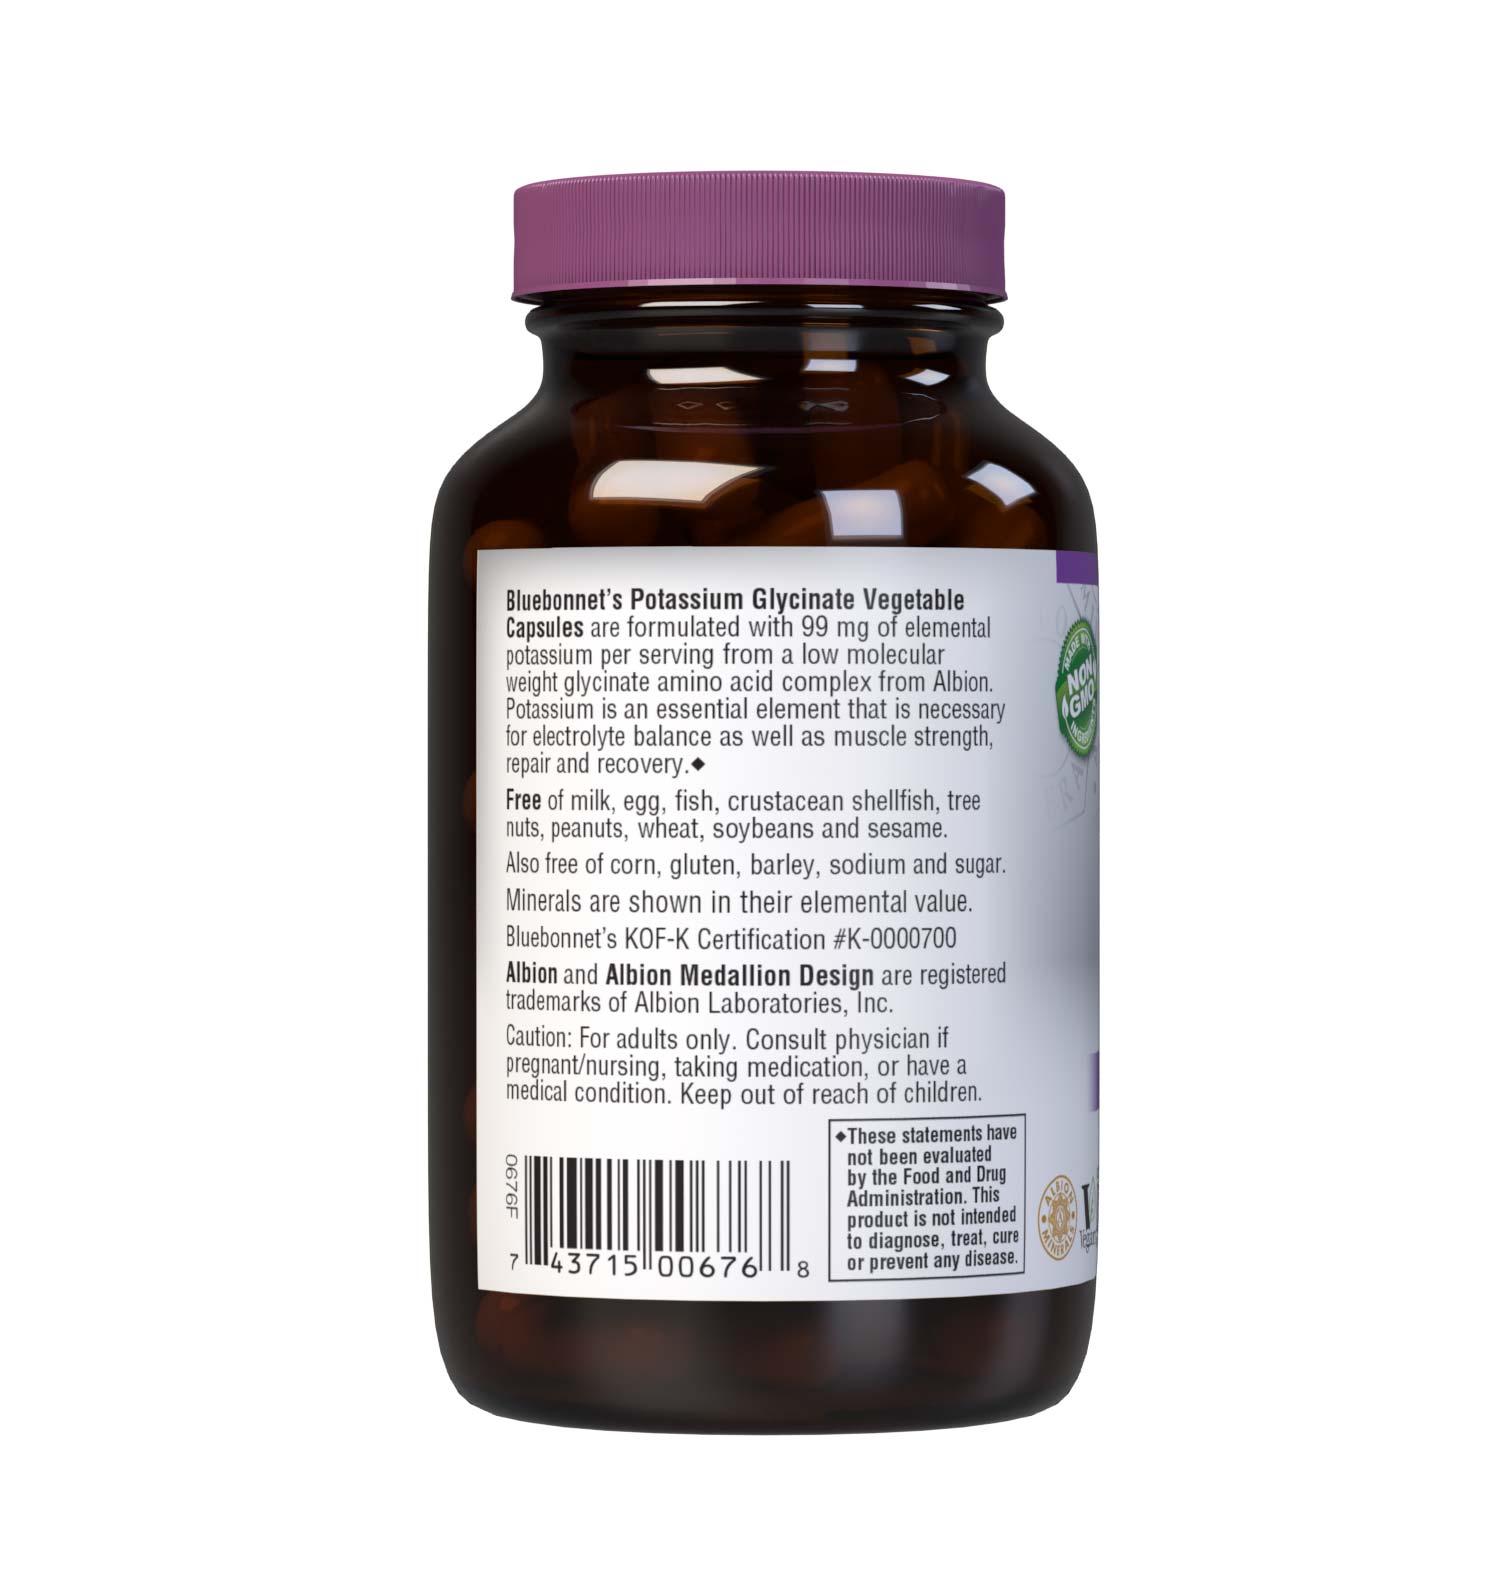 Bluebonnet's Potassium Glycinate 90 Vegetable Capsules are formulated with 99 mg of elemental potassium per serving from a low molecular weight glycinate amino acid complex from Albion. Potassium is an essential element that is necessary for electrolyte balance as well as muscle strength, repair and recovery. Description panel. #size_90 count